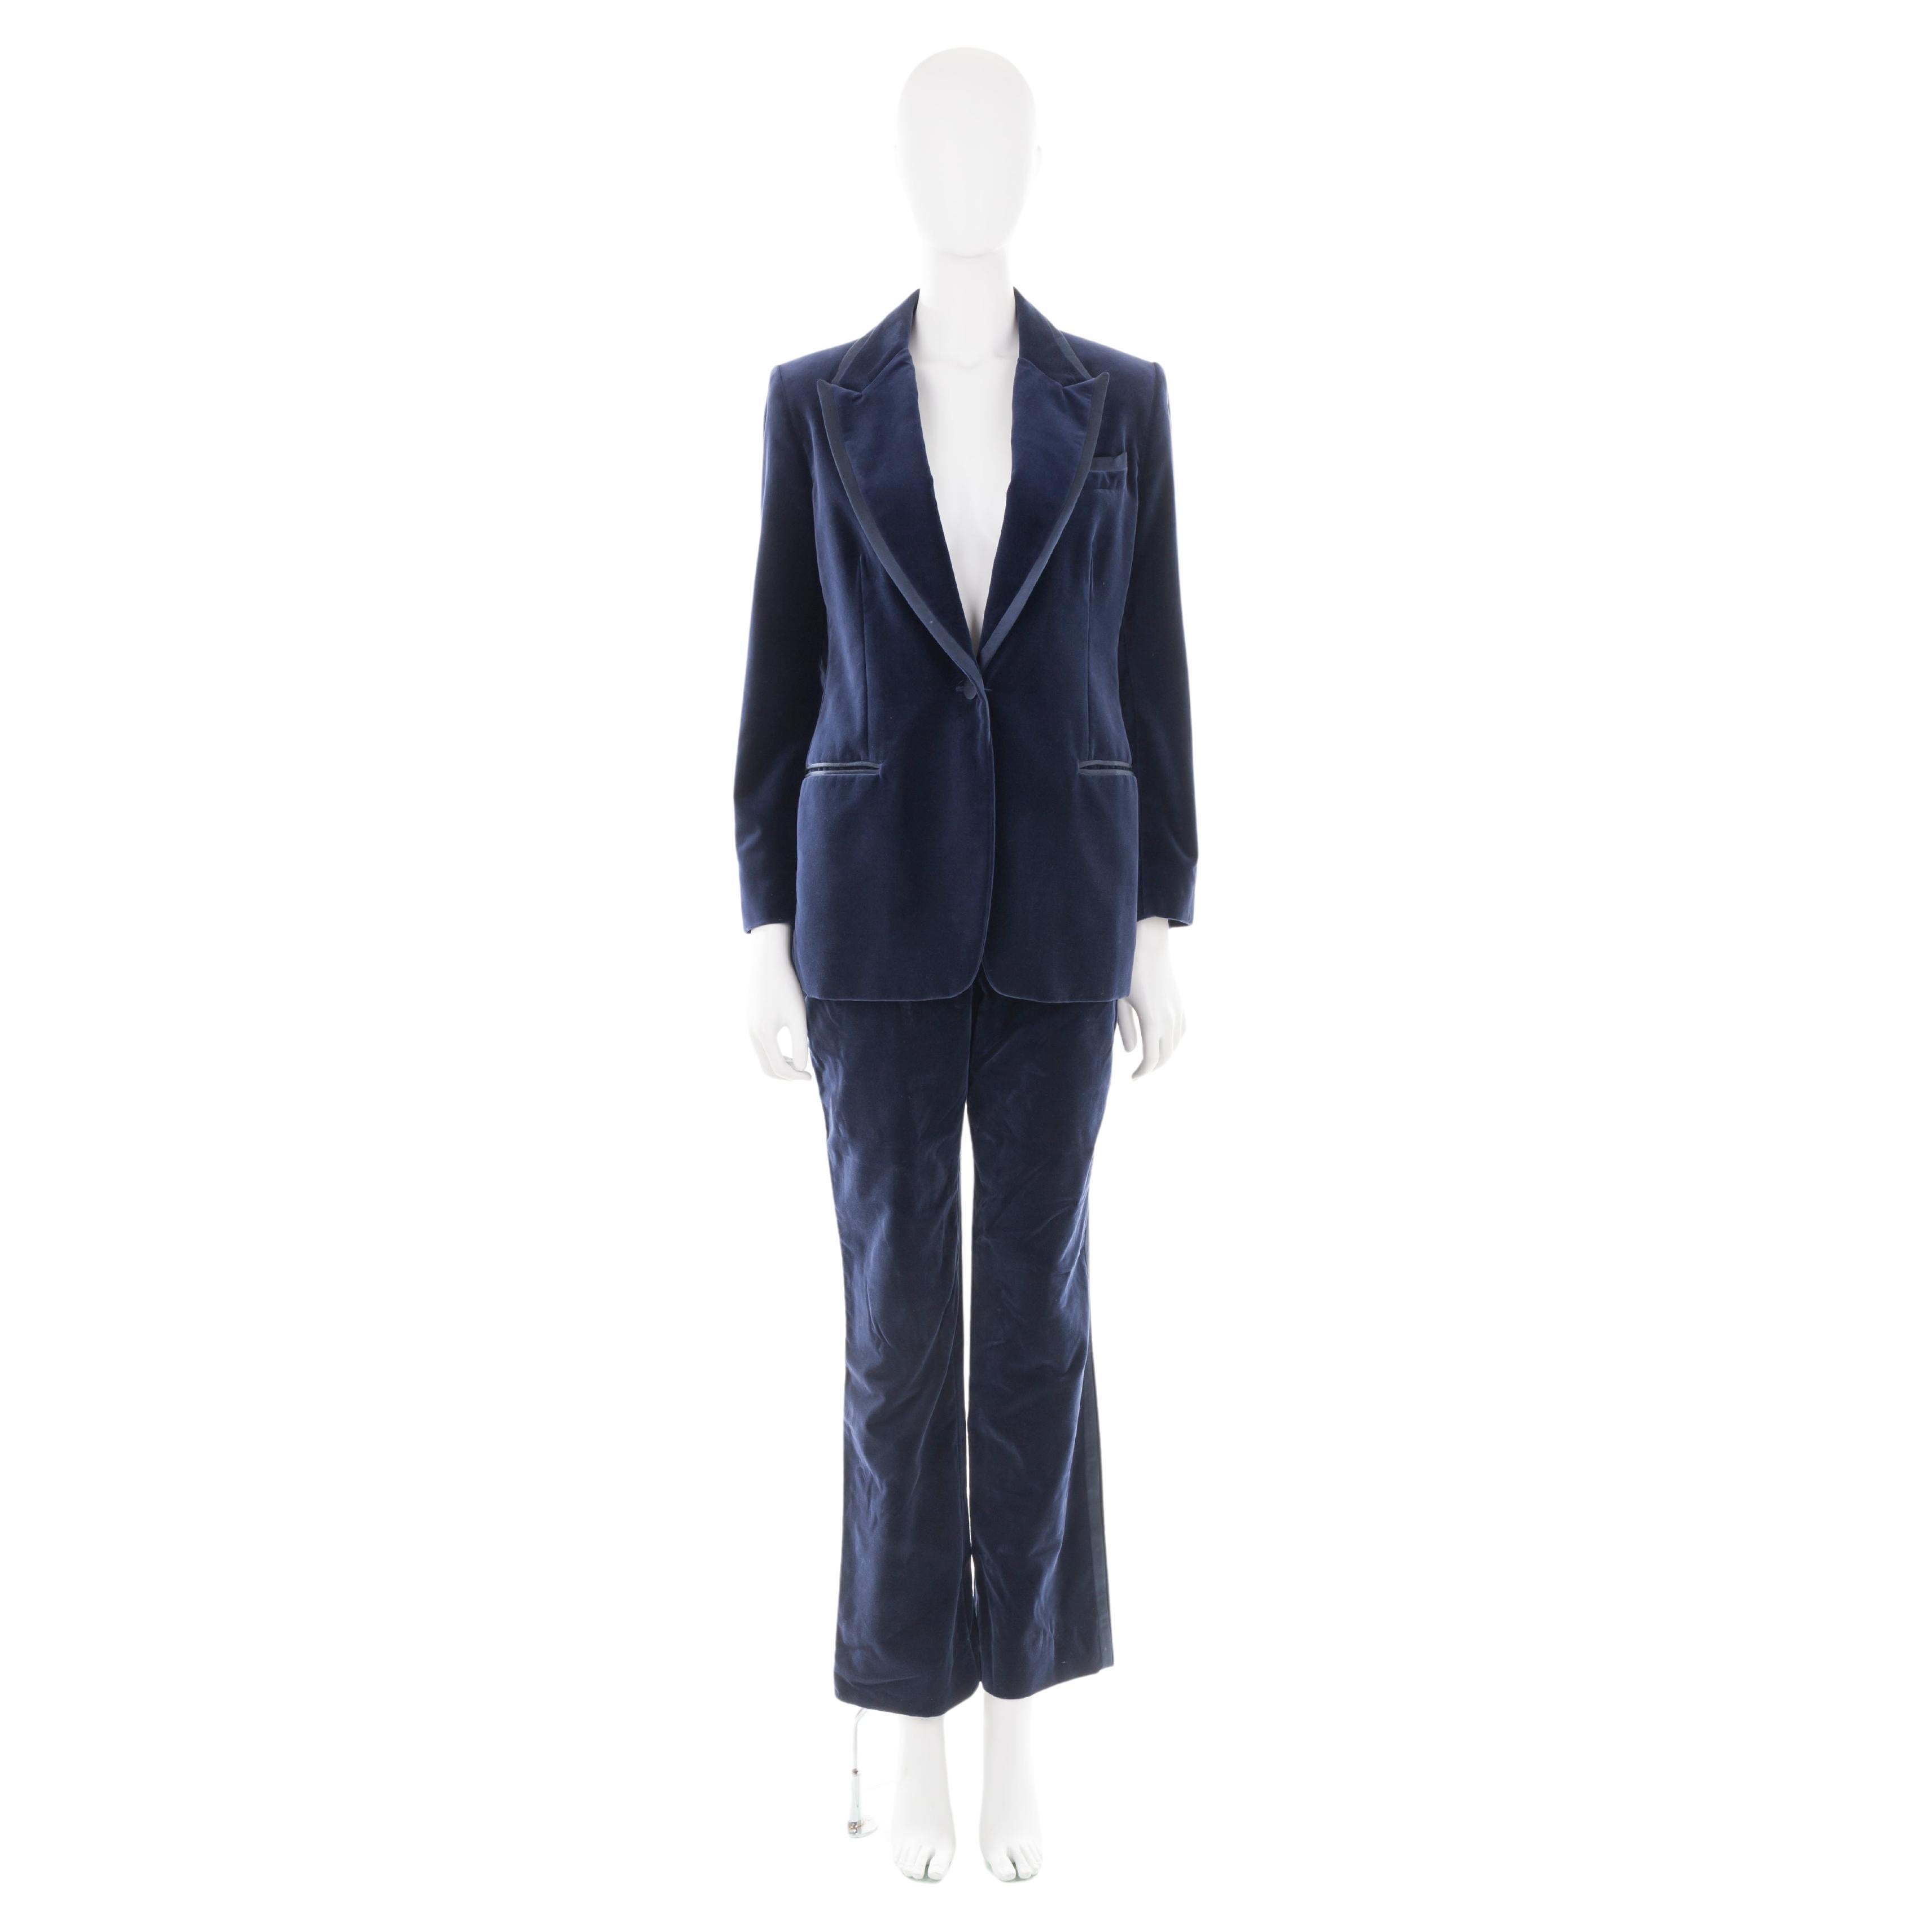 - Gucci by Tom Ford
- Navy blue velvet tuxedo suit
- Silk side pant and collar strips
- Size IT 42
